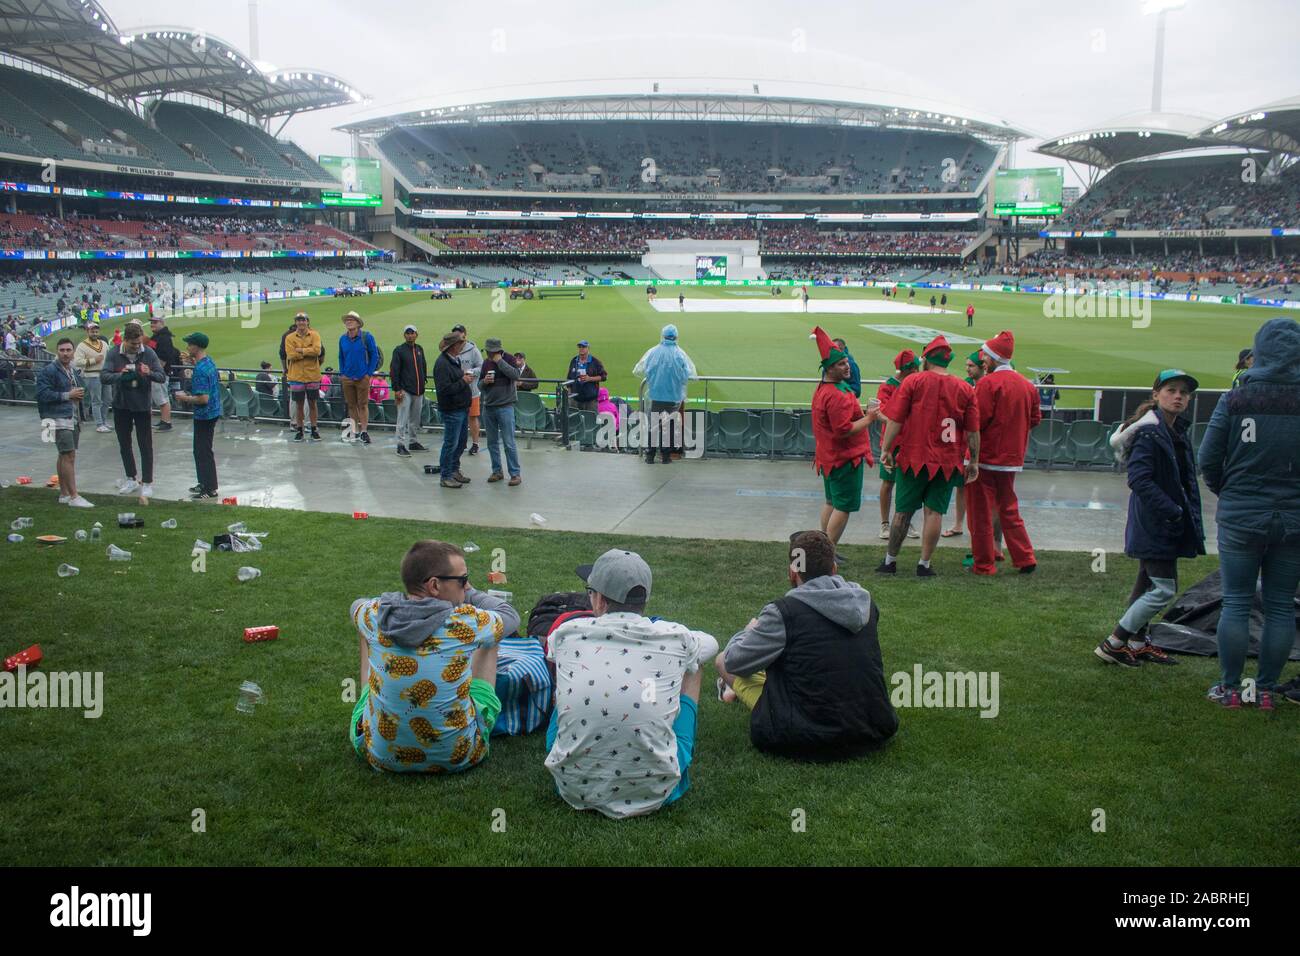 Adelaide, Australia 29 November 2019. Cricket fans during a rain delay on the opening day of  the 2nd Domain Day Night test between Australia and Pakistan at the Adelaide Oval. Australia leads 1-0 in the 2 match series .Credit: amer ghazzal/Alamy Live News Stock Photo